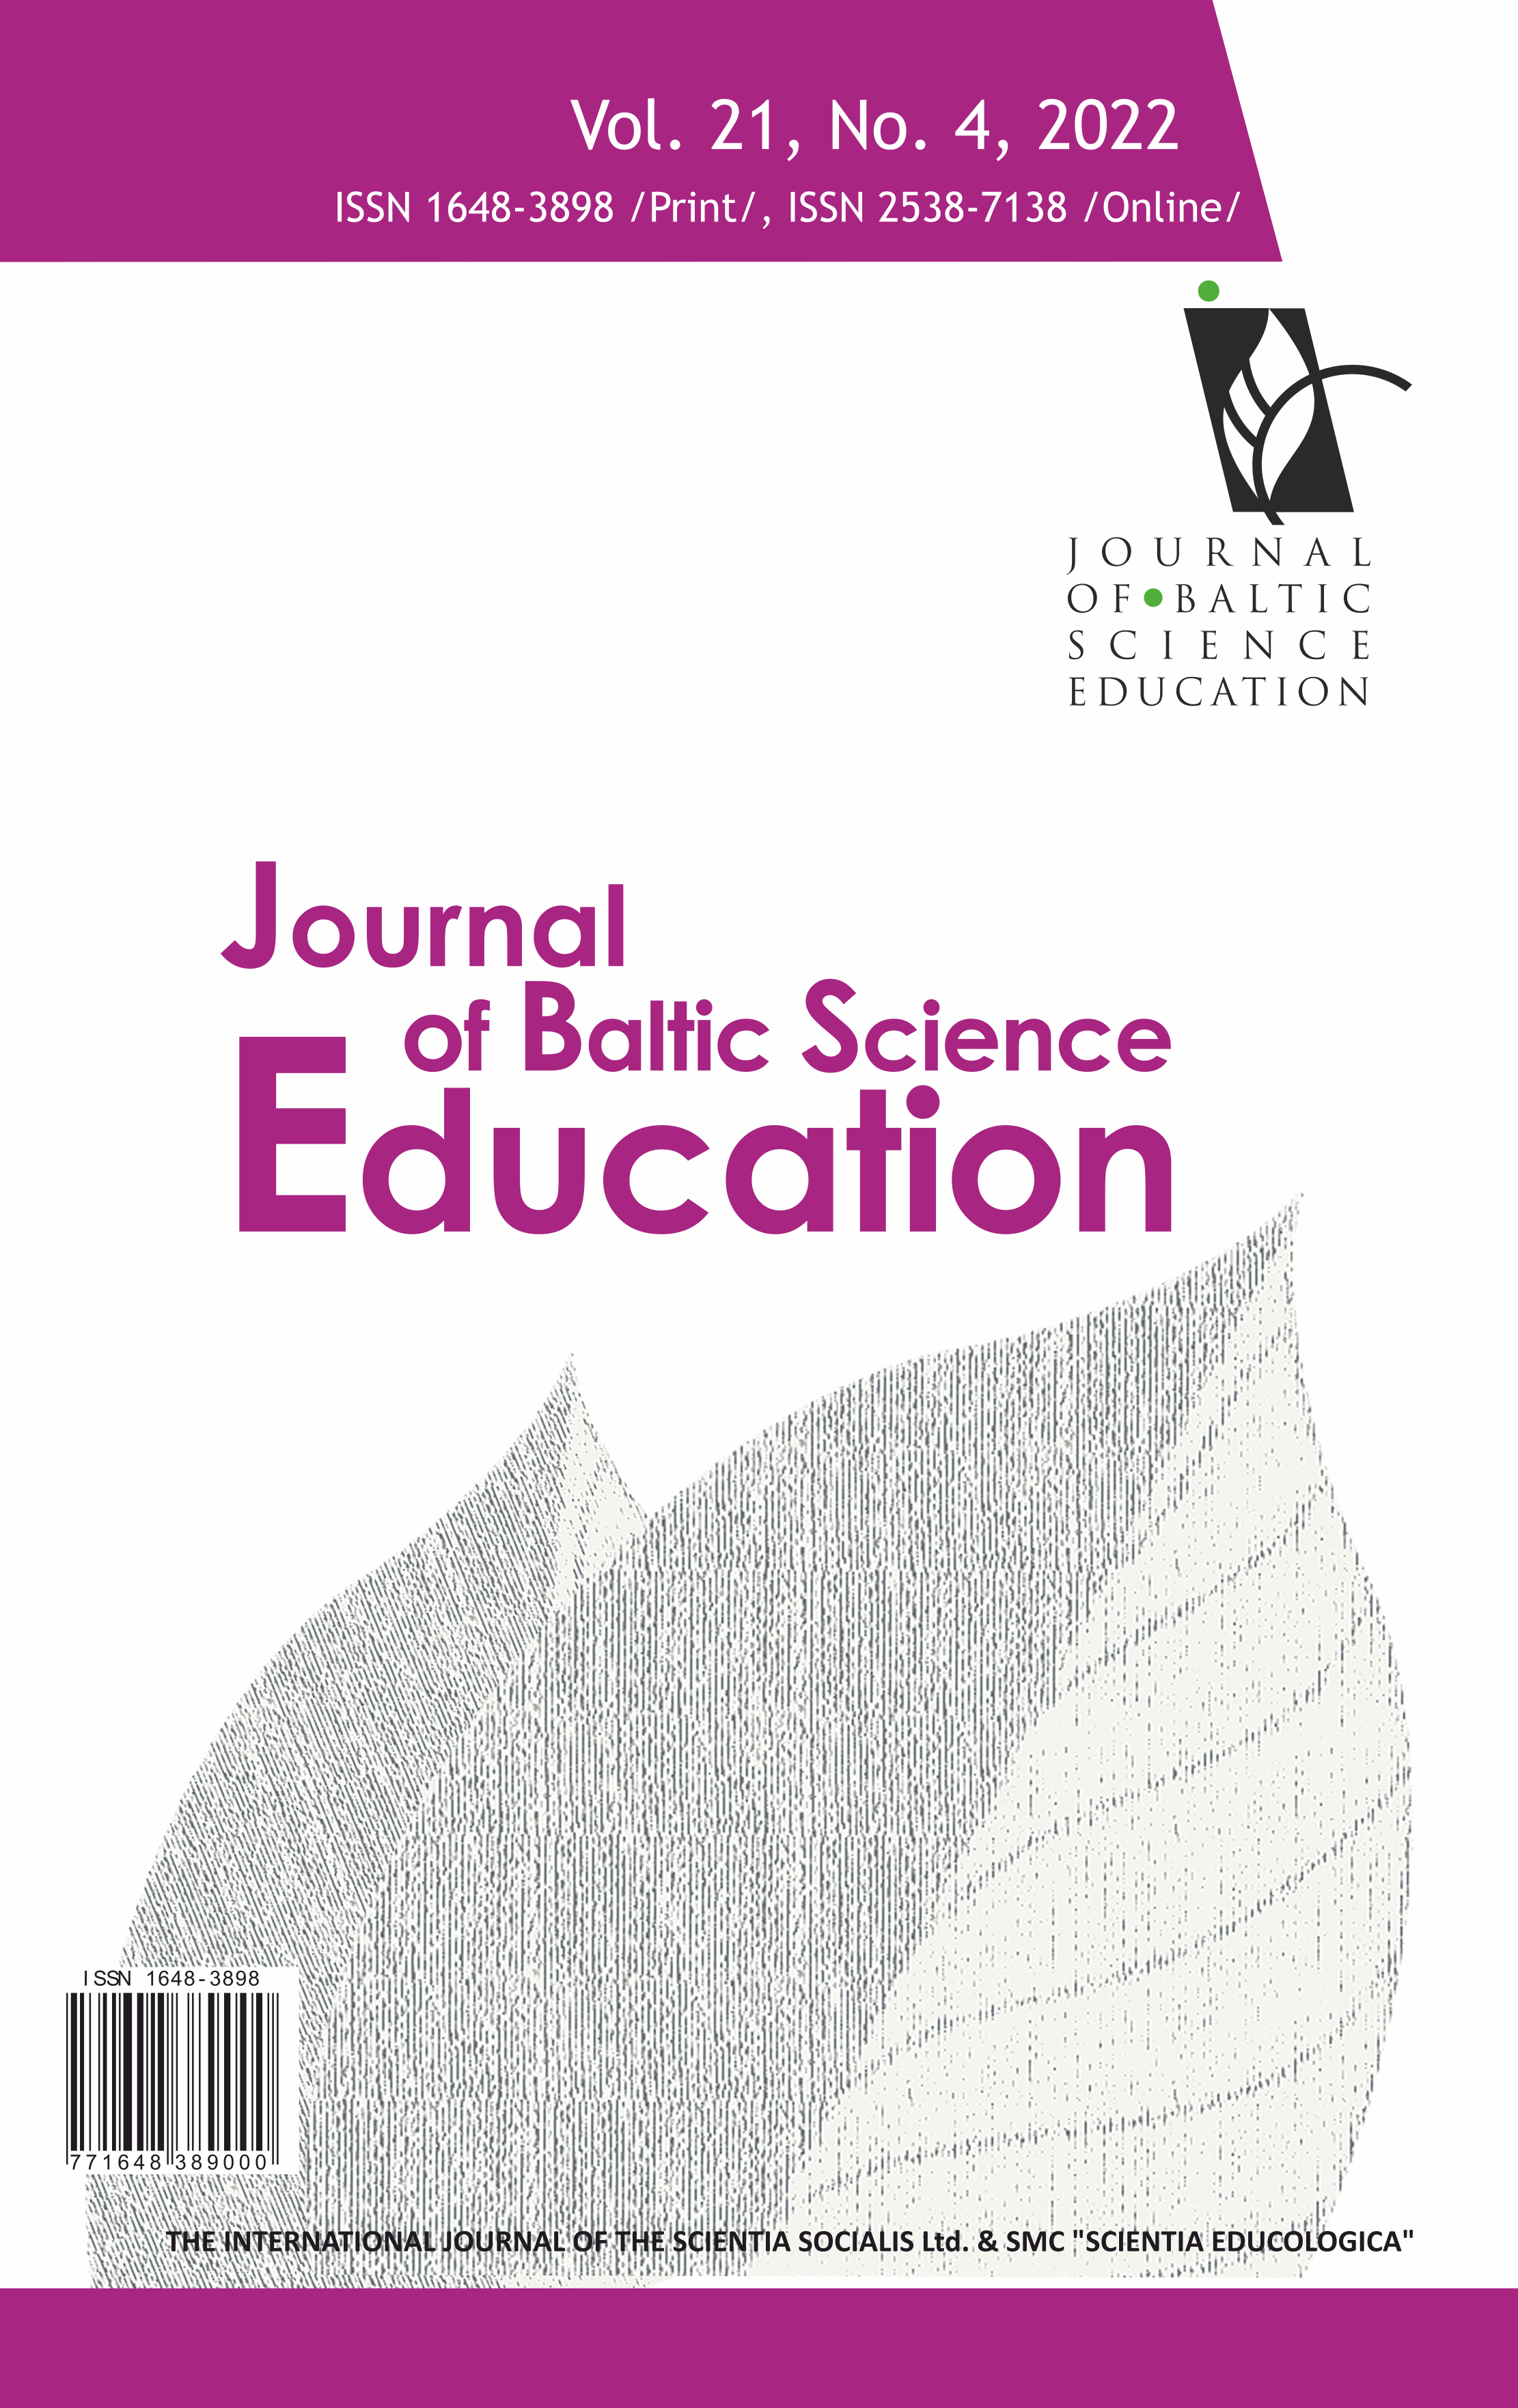 THE JIGSAW TECHNIQUE IN LOWER SECONDARY PHYSICS EDUCATION: STUDENTS’ ACHIEVEMENT, METACOGNITION AND MOTIVATION Cover Image